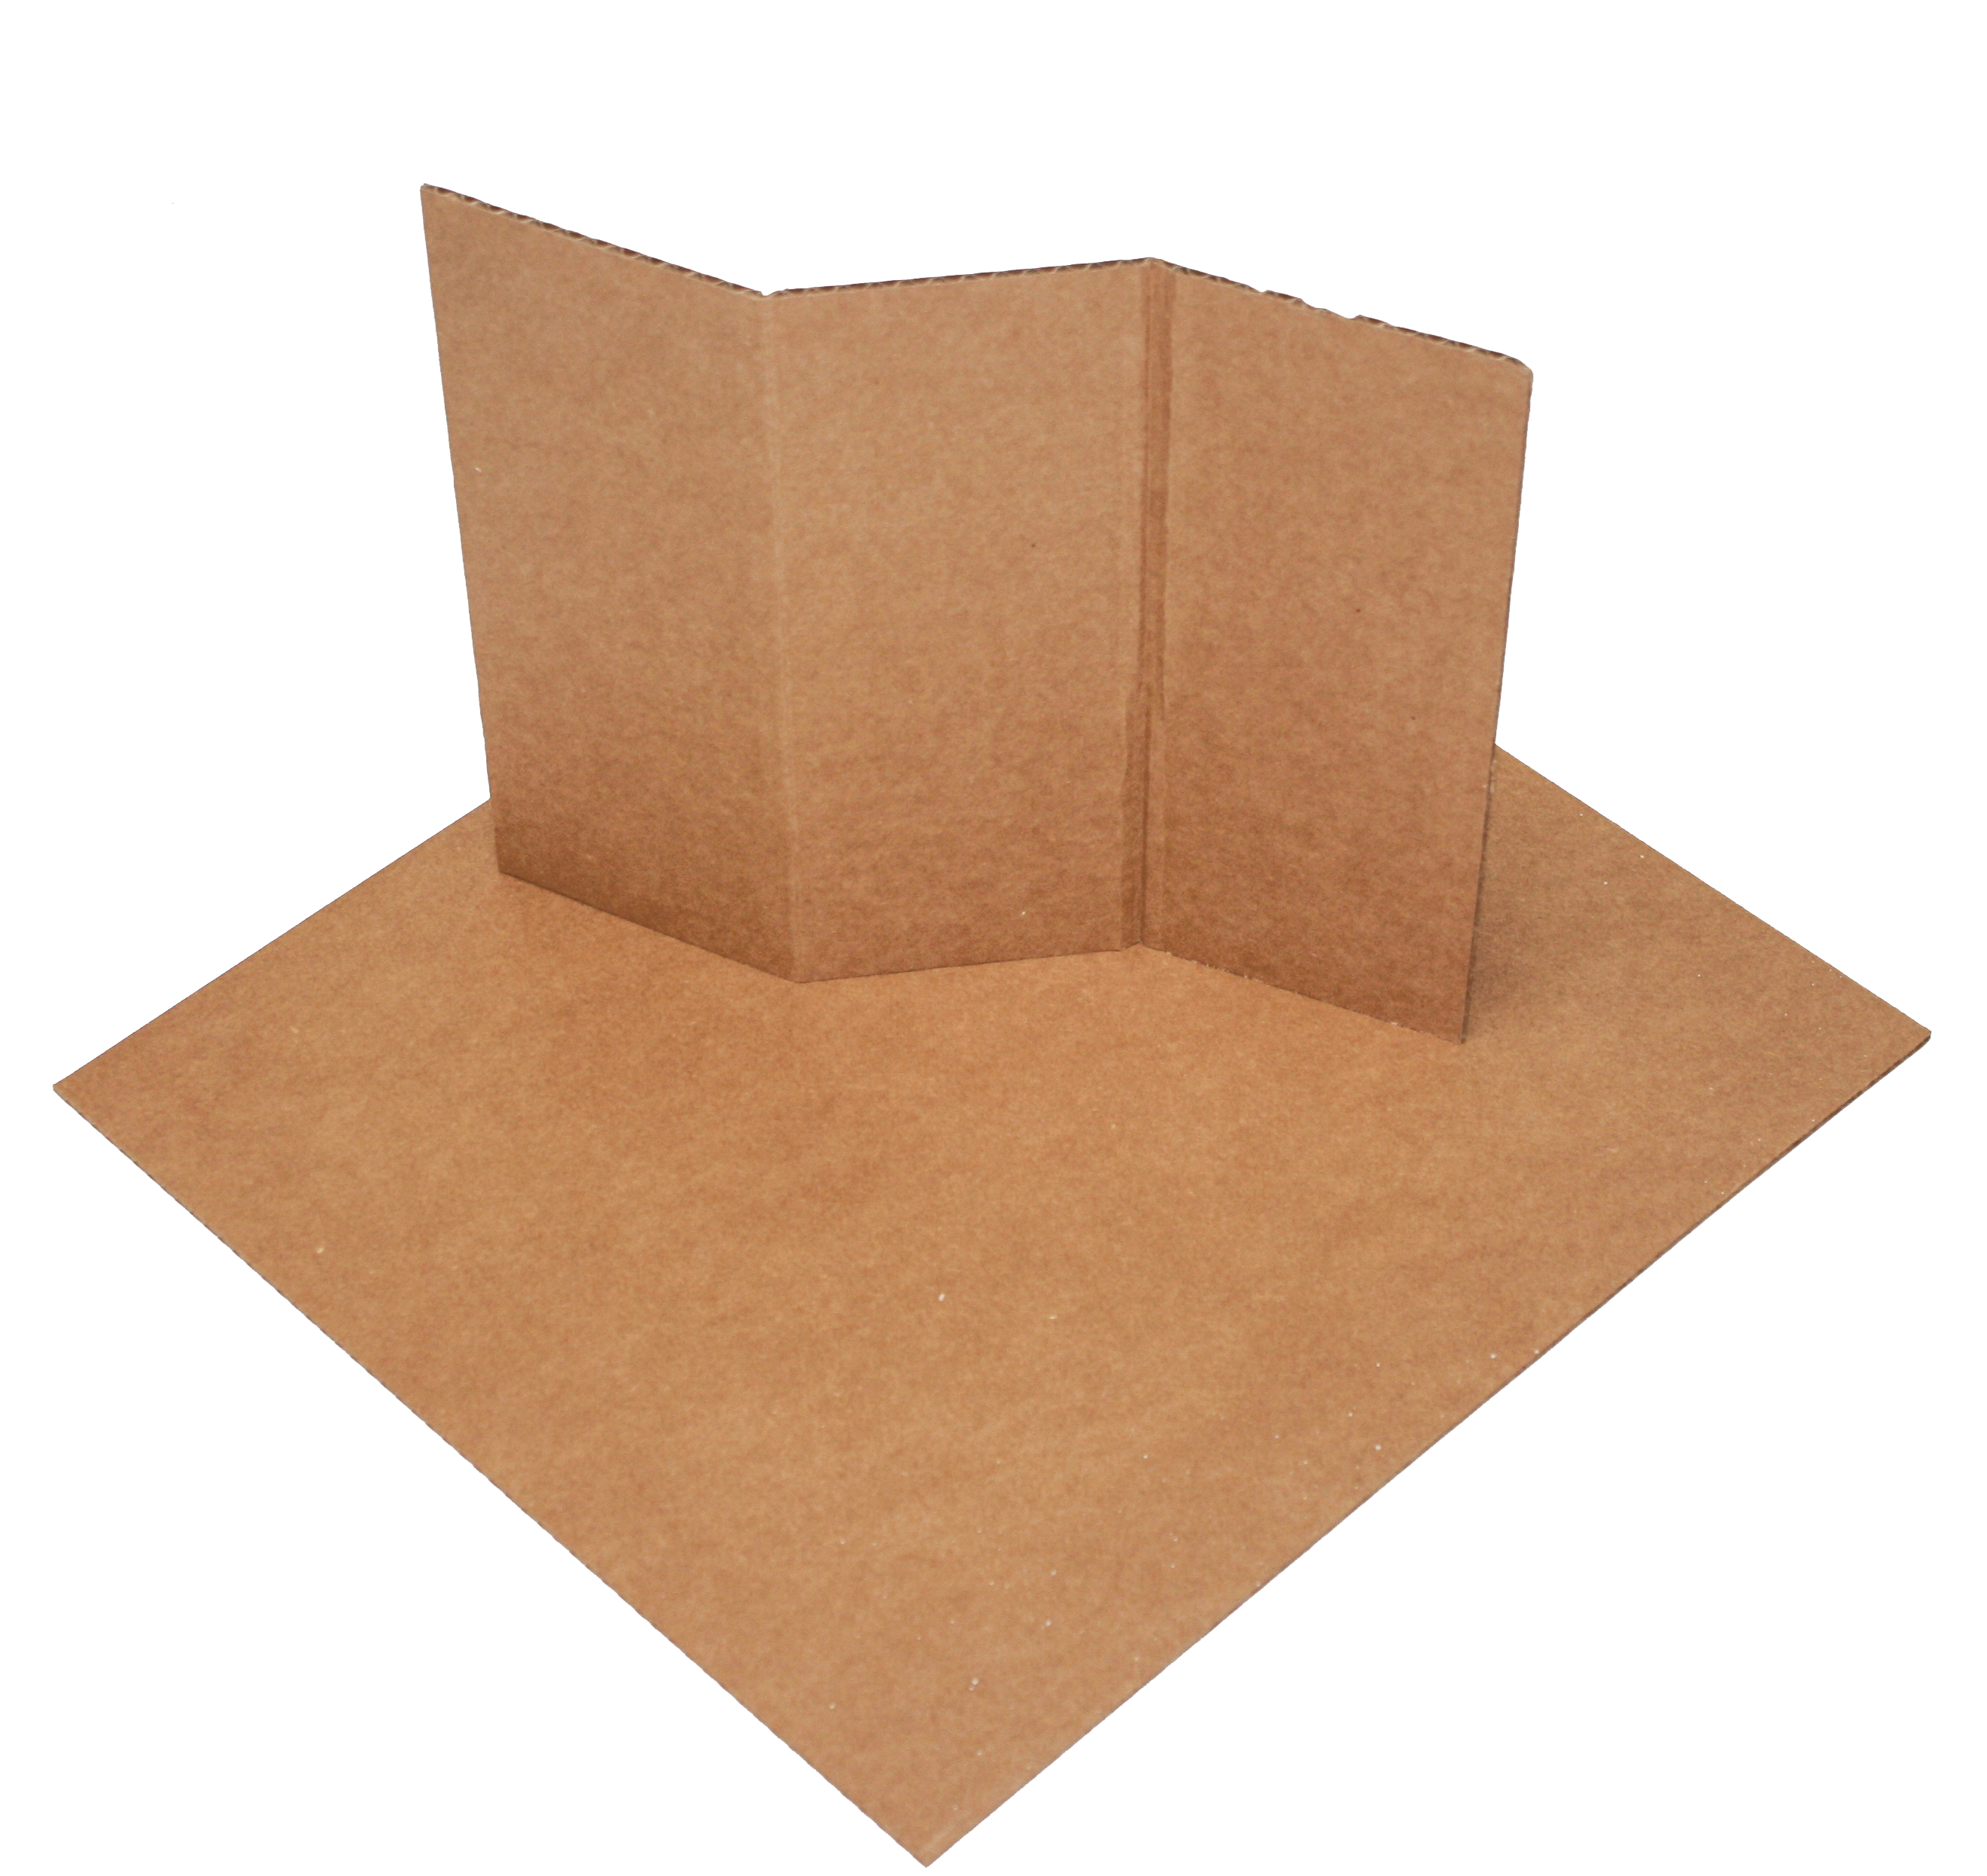 Corrugated Pads Chase Partitions Inc, Corrugated Cardboard Sheets Home Depot